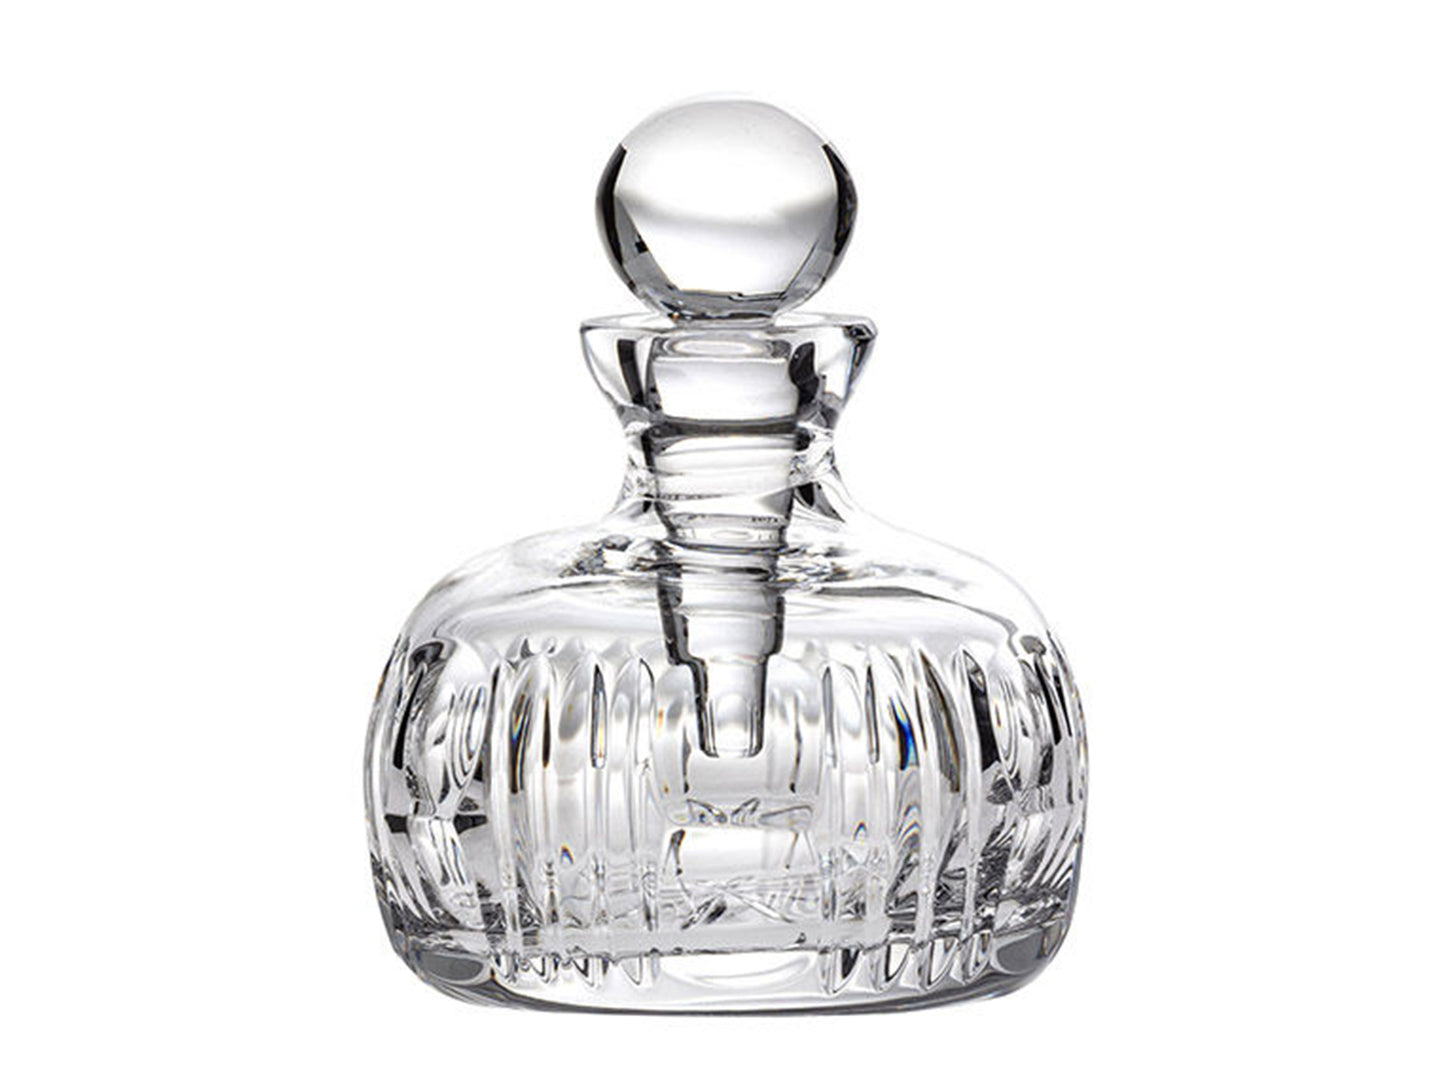 A solid crystal perfume bottle with a dabber stick and stopper. The bottle has a cut pattern with vertical slashes cut into the outside.